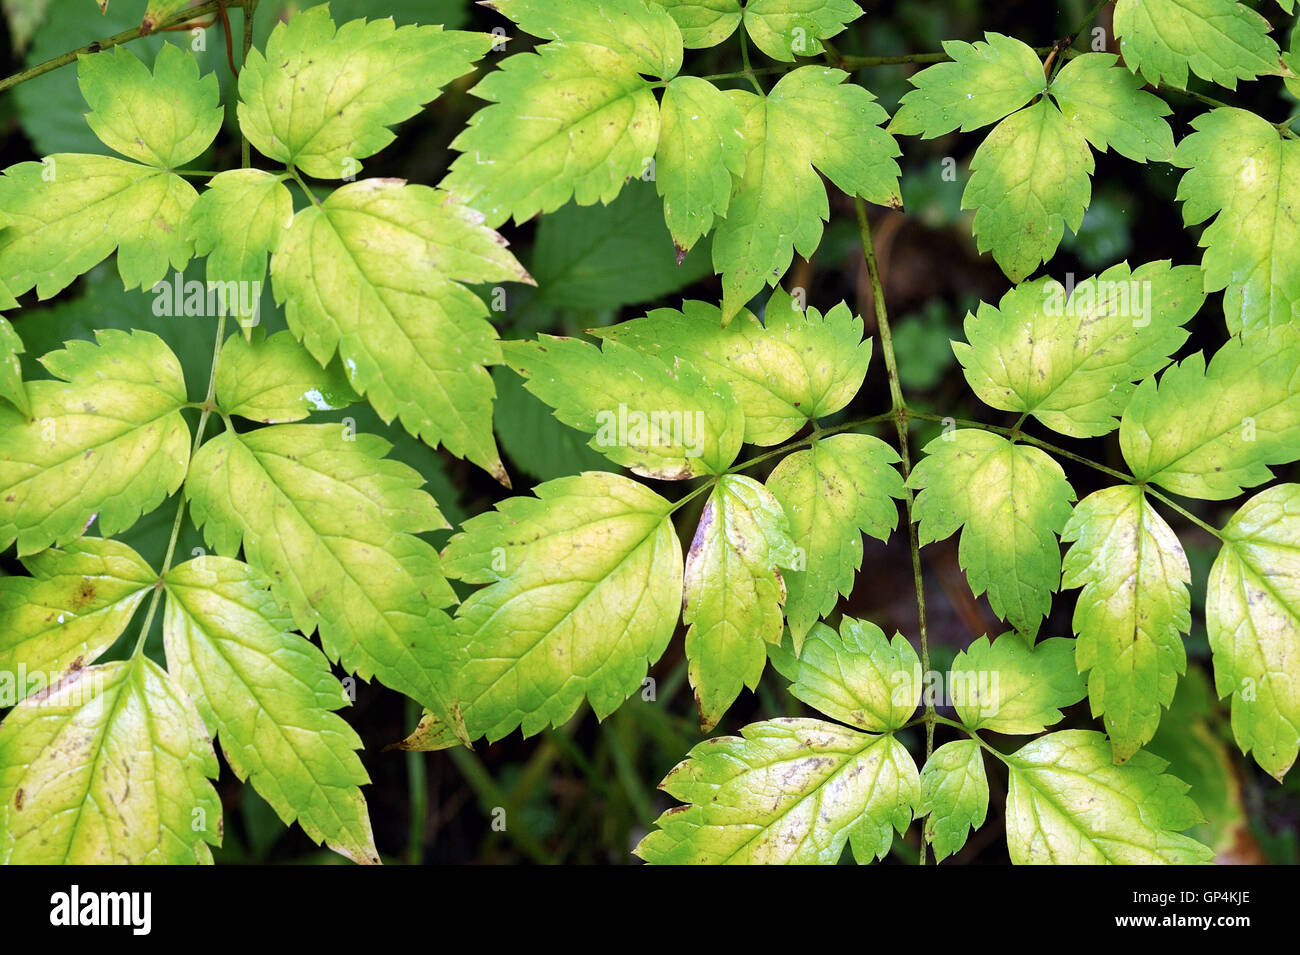 Close up background of forest plant with leaves changed color from green to yellow in beginning of autumn. Stock Photo